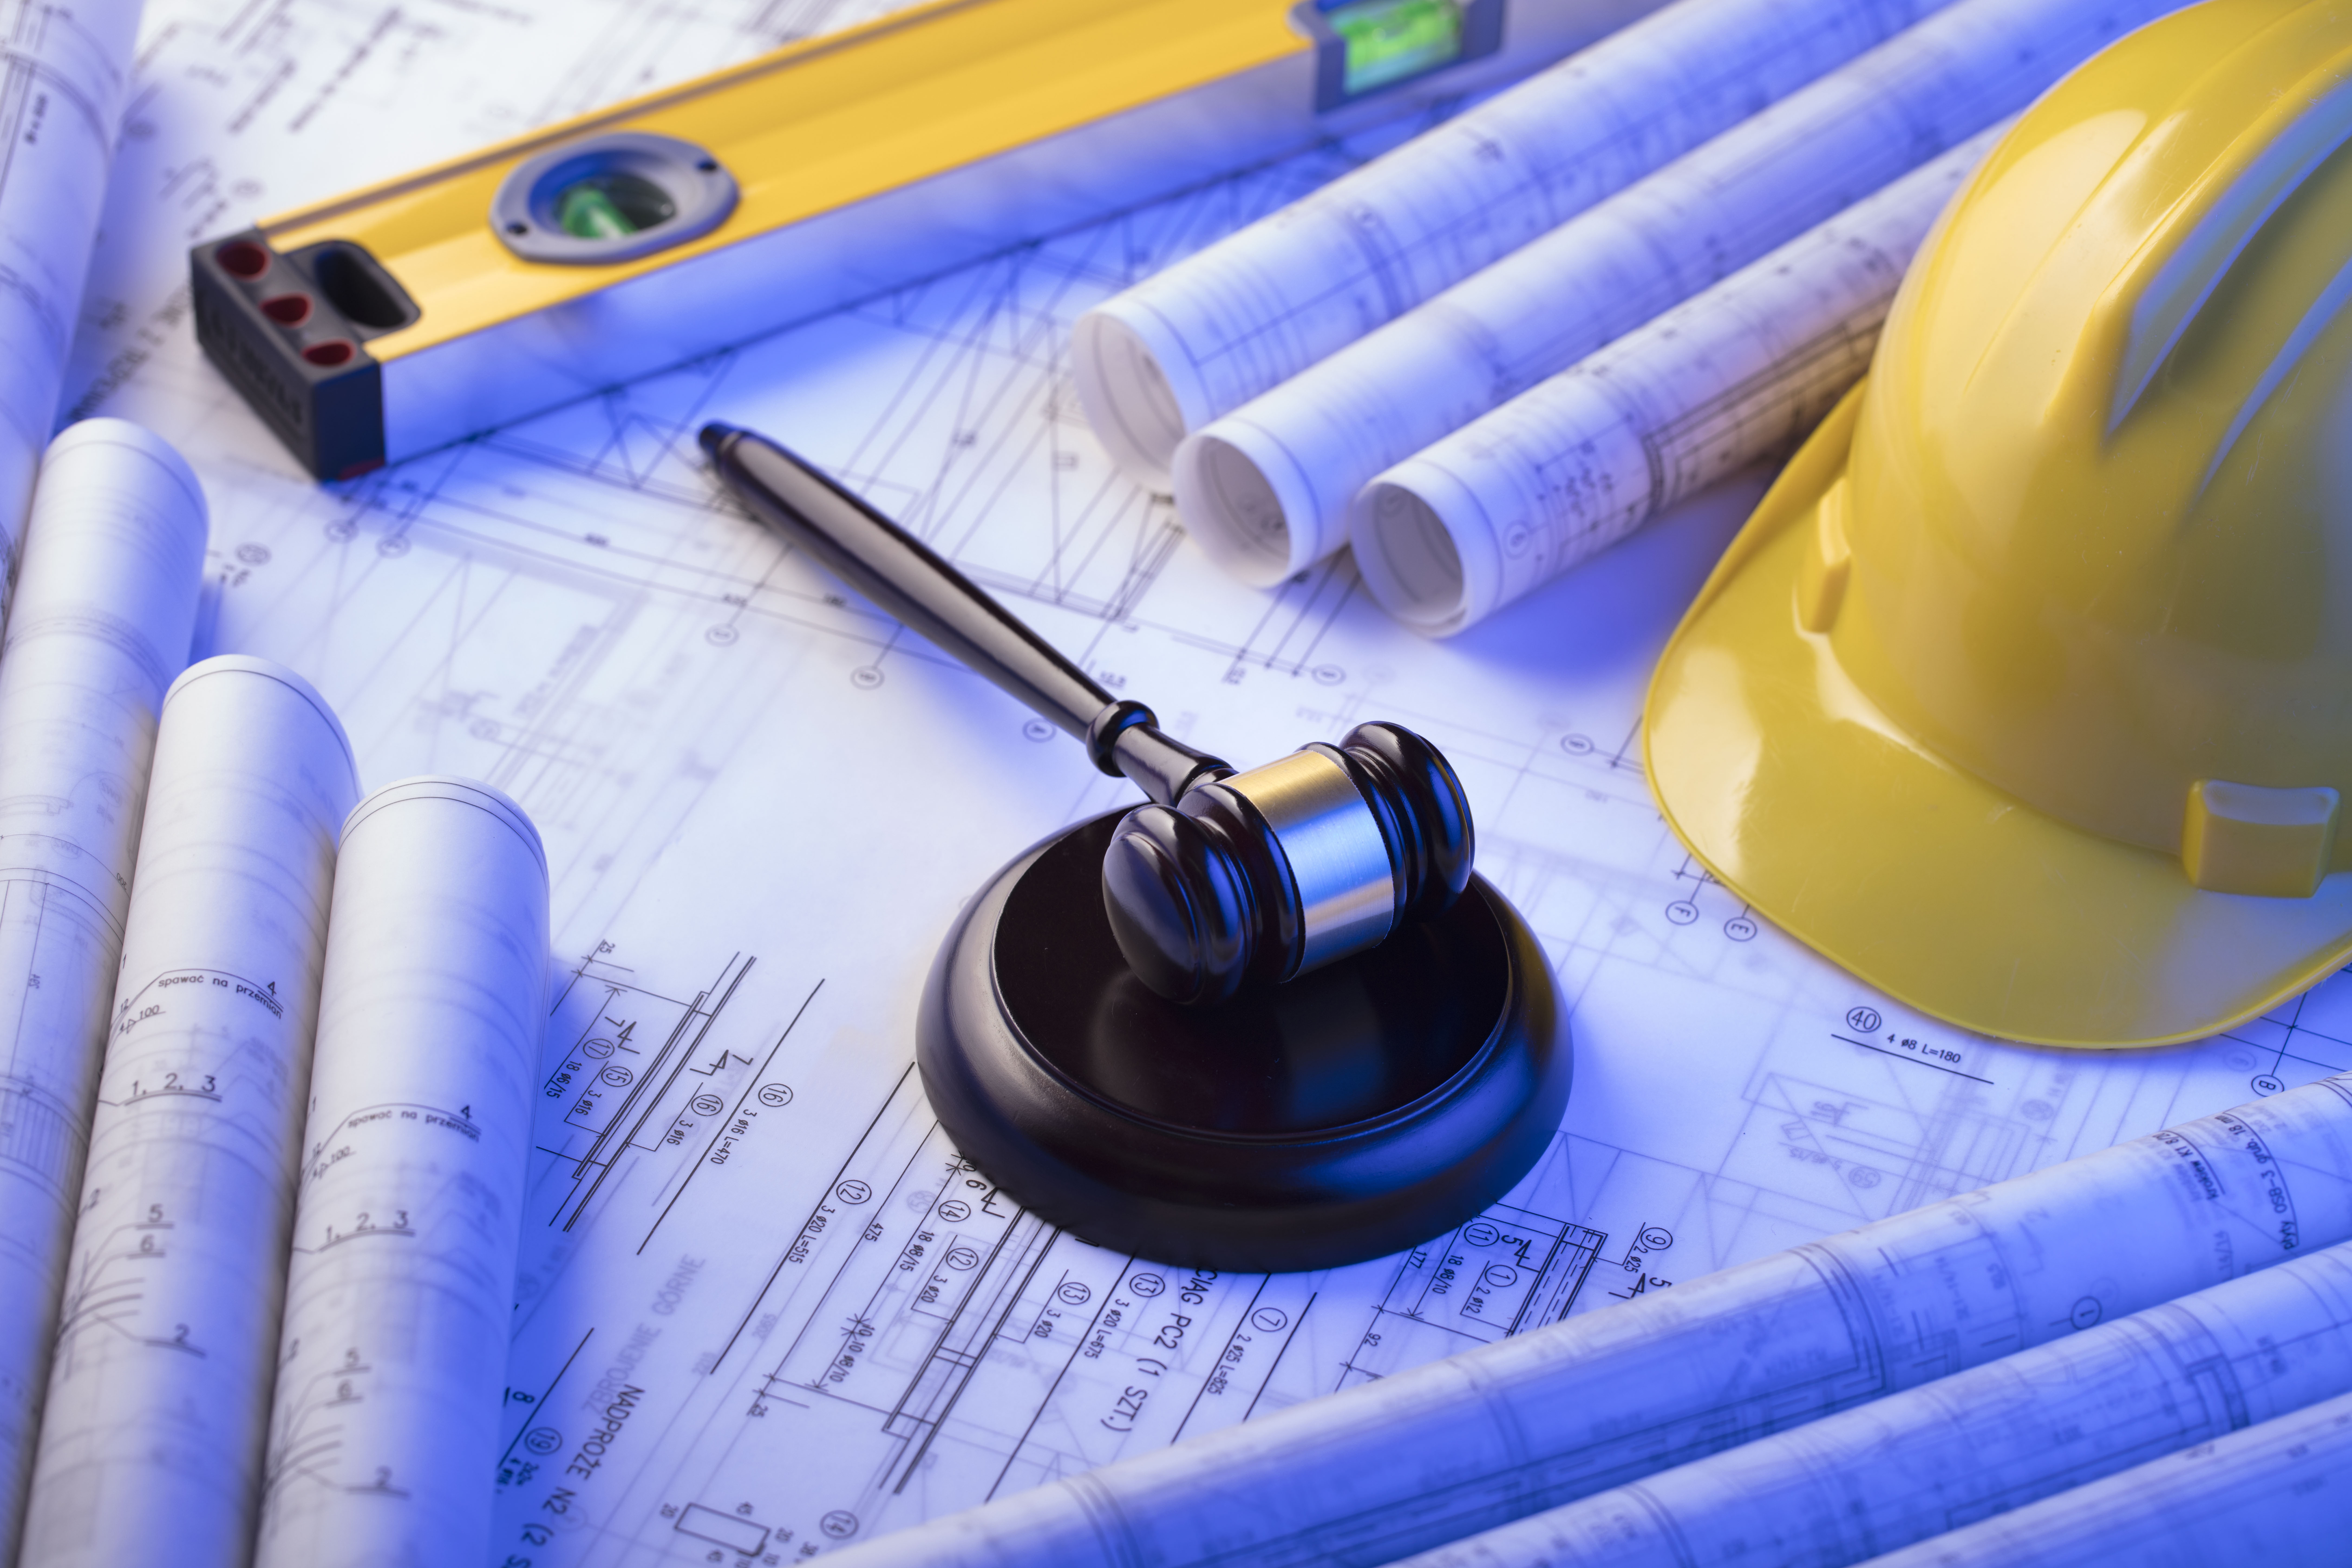 What Does a Construction Lawyer Do